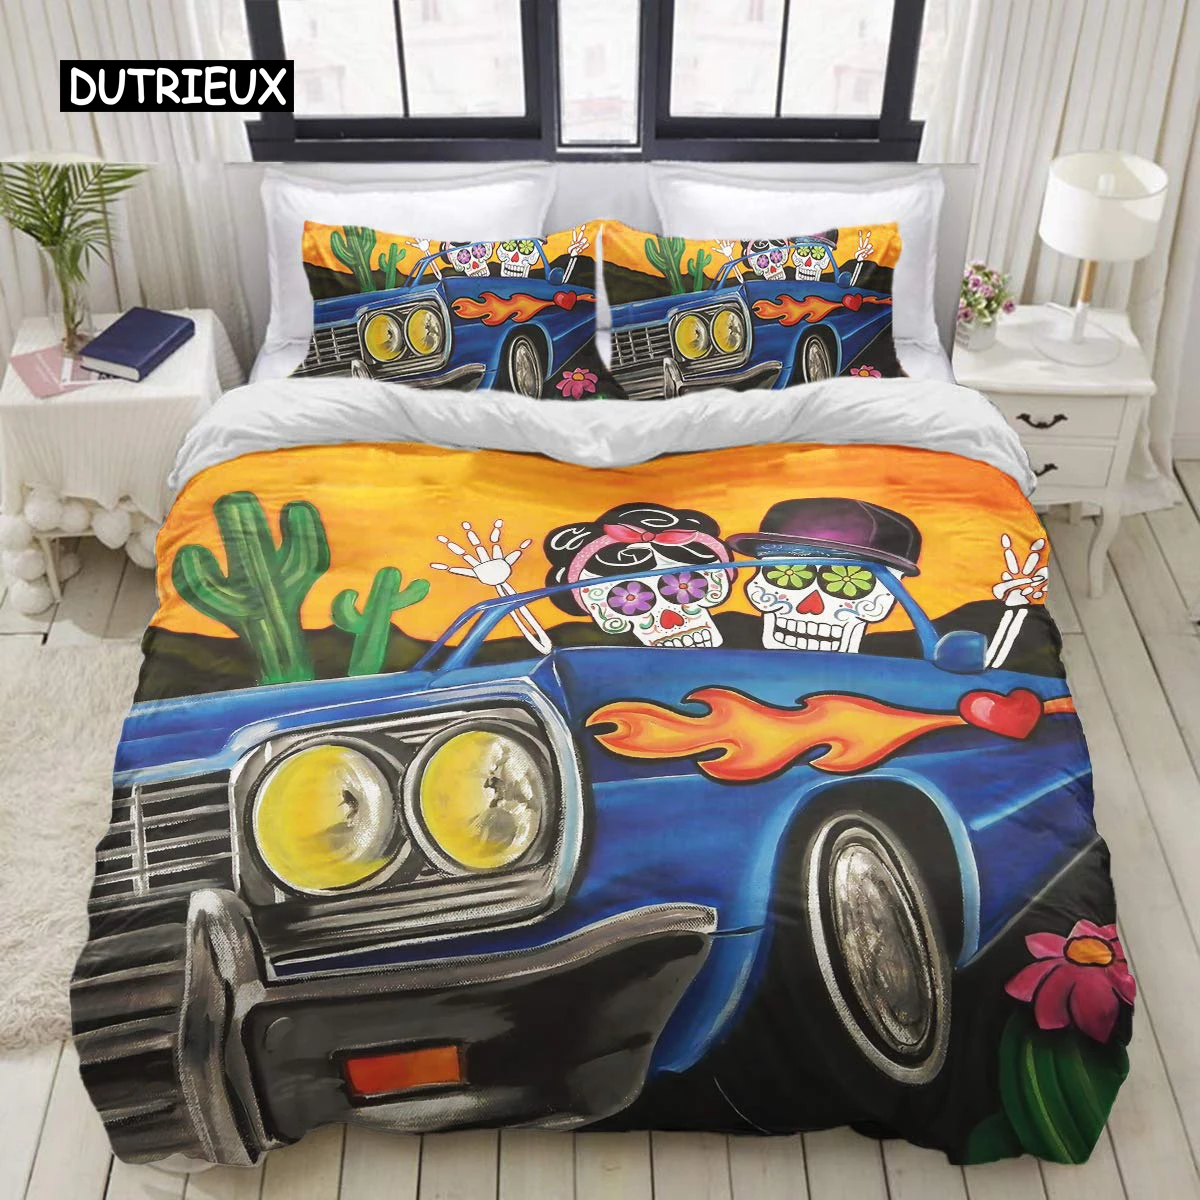 

Sugar Skull King Queen Duvet Cover Cartoon Skeleton Blue Car Bedding Set for Teens Adults Halloween Day of The Dead Quilt Cover